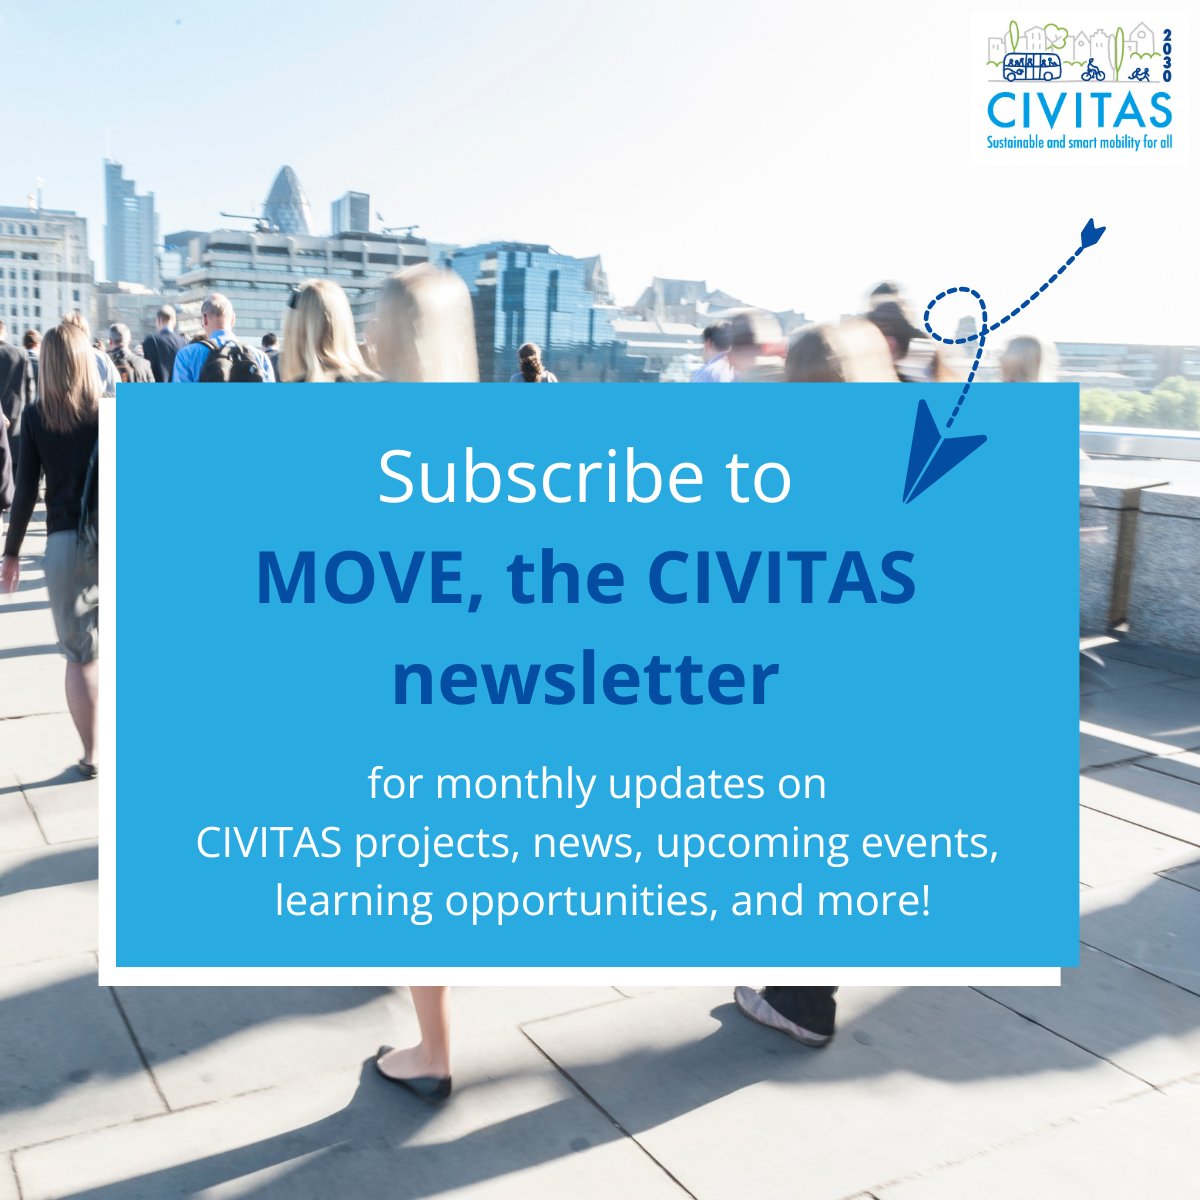 📨 Have you subscribed to our monthly MOVE #newsletter? The April edition is coming out soon! Don't miss out on updates from over 15 CIVITAS projects 🇪🇺, as well as news 📰, events 📍, conferences 🤝, learning opportunities 📚, and more! Sign up here 👉 civitas.eu/newsletters